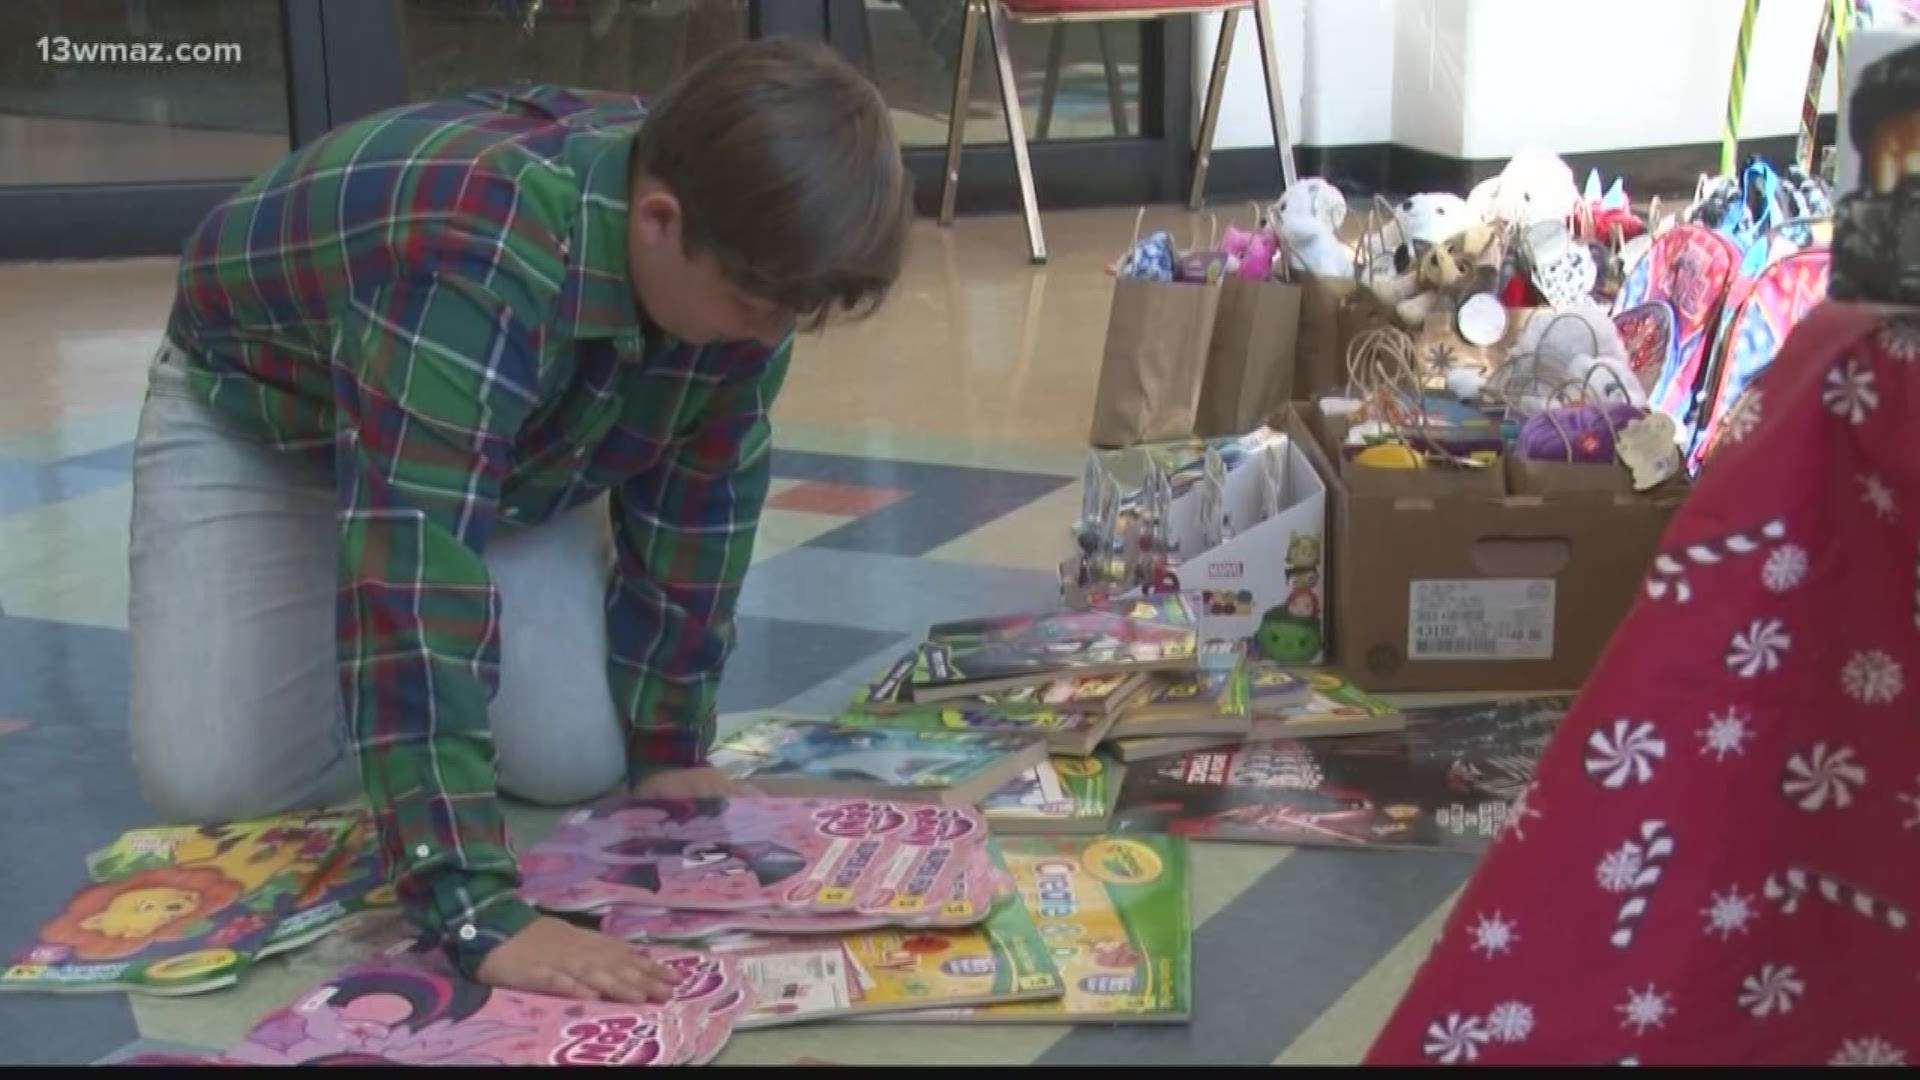 Dodge County 6th grader Christian LeCouris is using money he won in 4H and Future Farmers of America competitions to buy gifts for other kids.